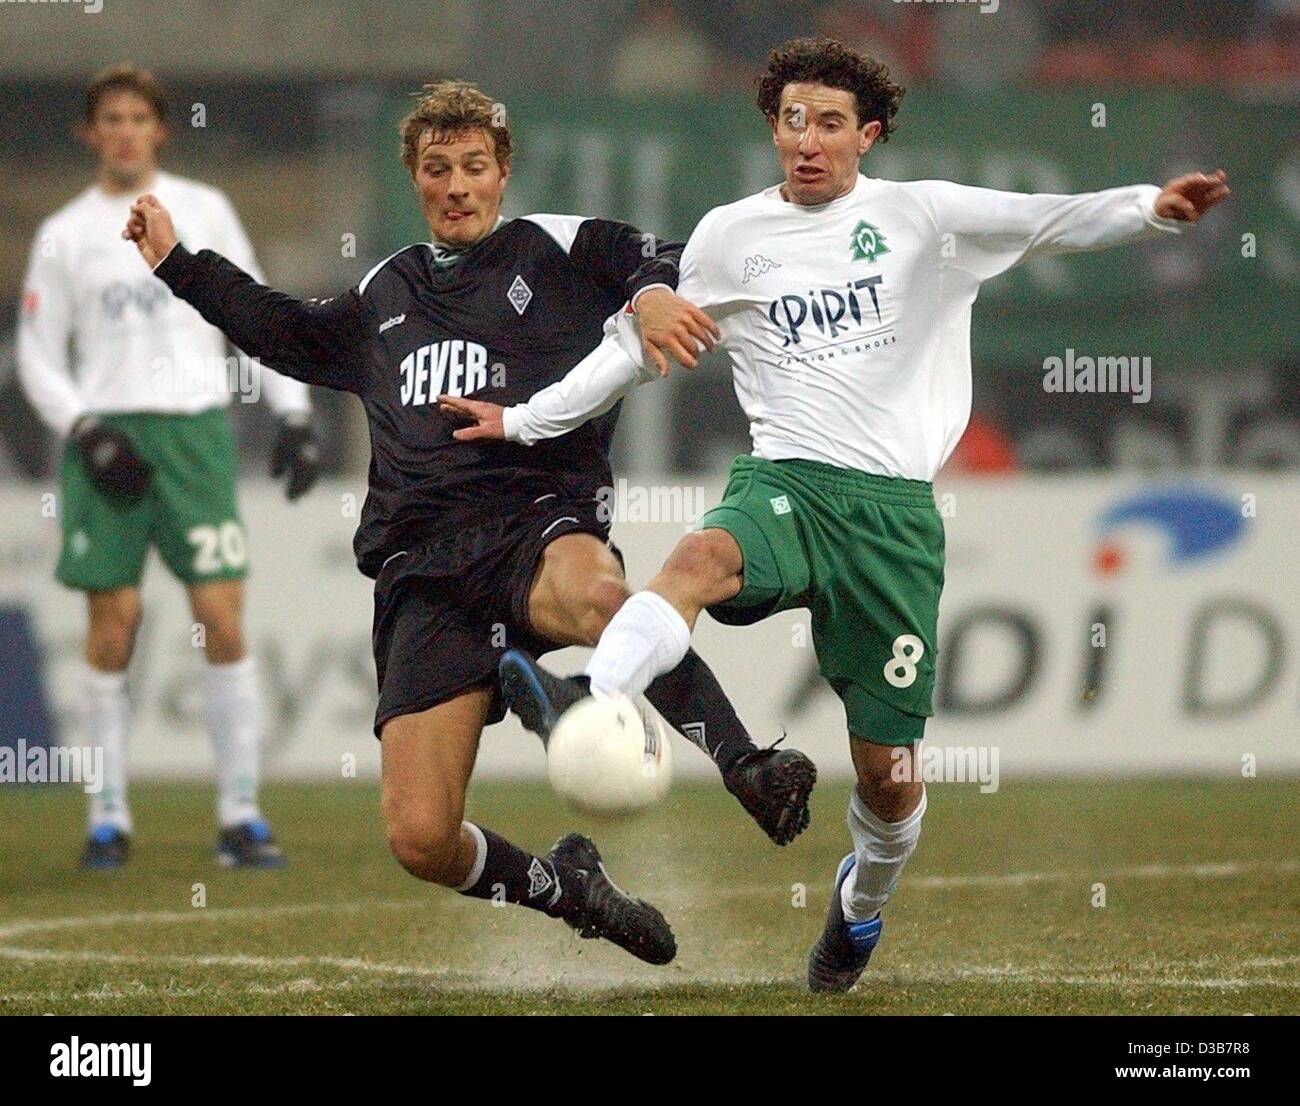 (dpa) - Bremen's Hungarian midfielder Krisztian Lisztes (R) is attacked by Gladbach's Czech midfielder Ivo Ulrich (L) during the Bundesliga soccer match Werder Bremen against Borussia Moenchengladbach in Bremen, Germany, 14 December 2002. Bremen wins 2-0 and remains third on the league table. Stock Photo